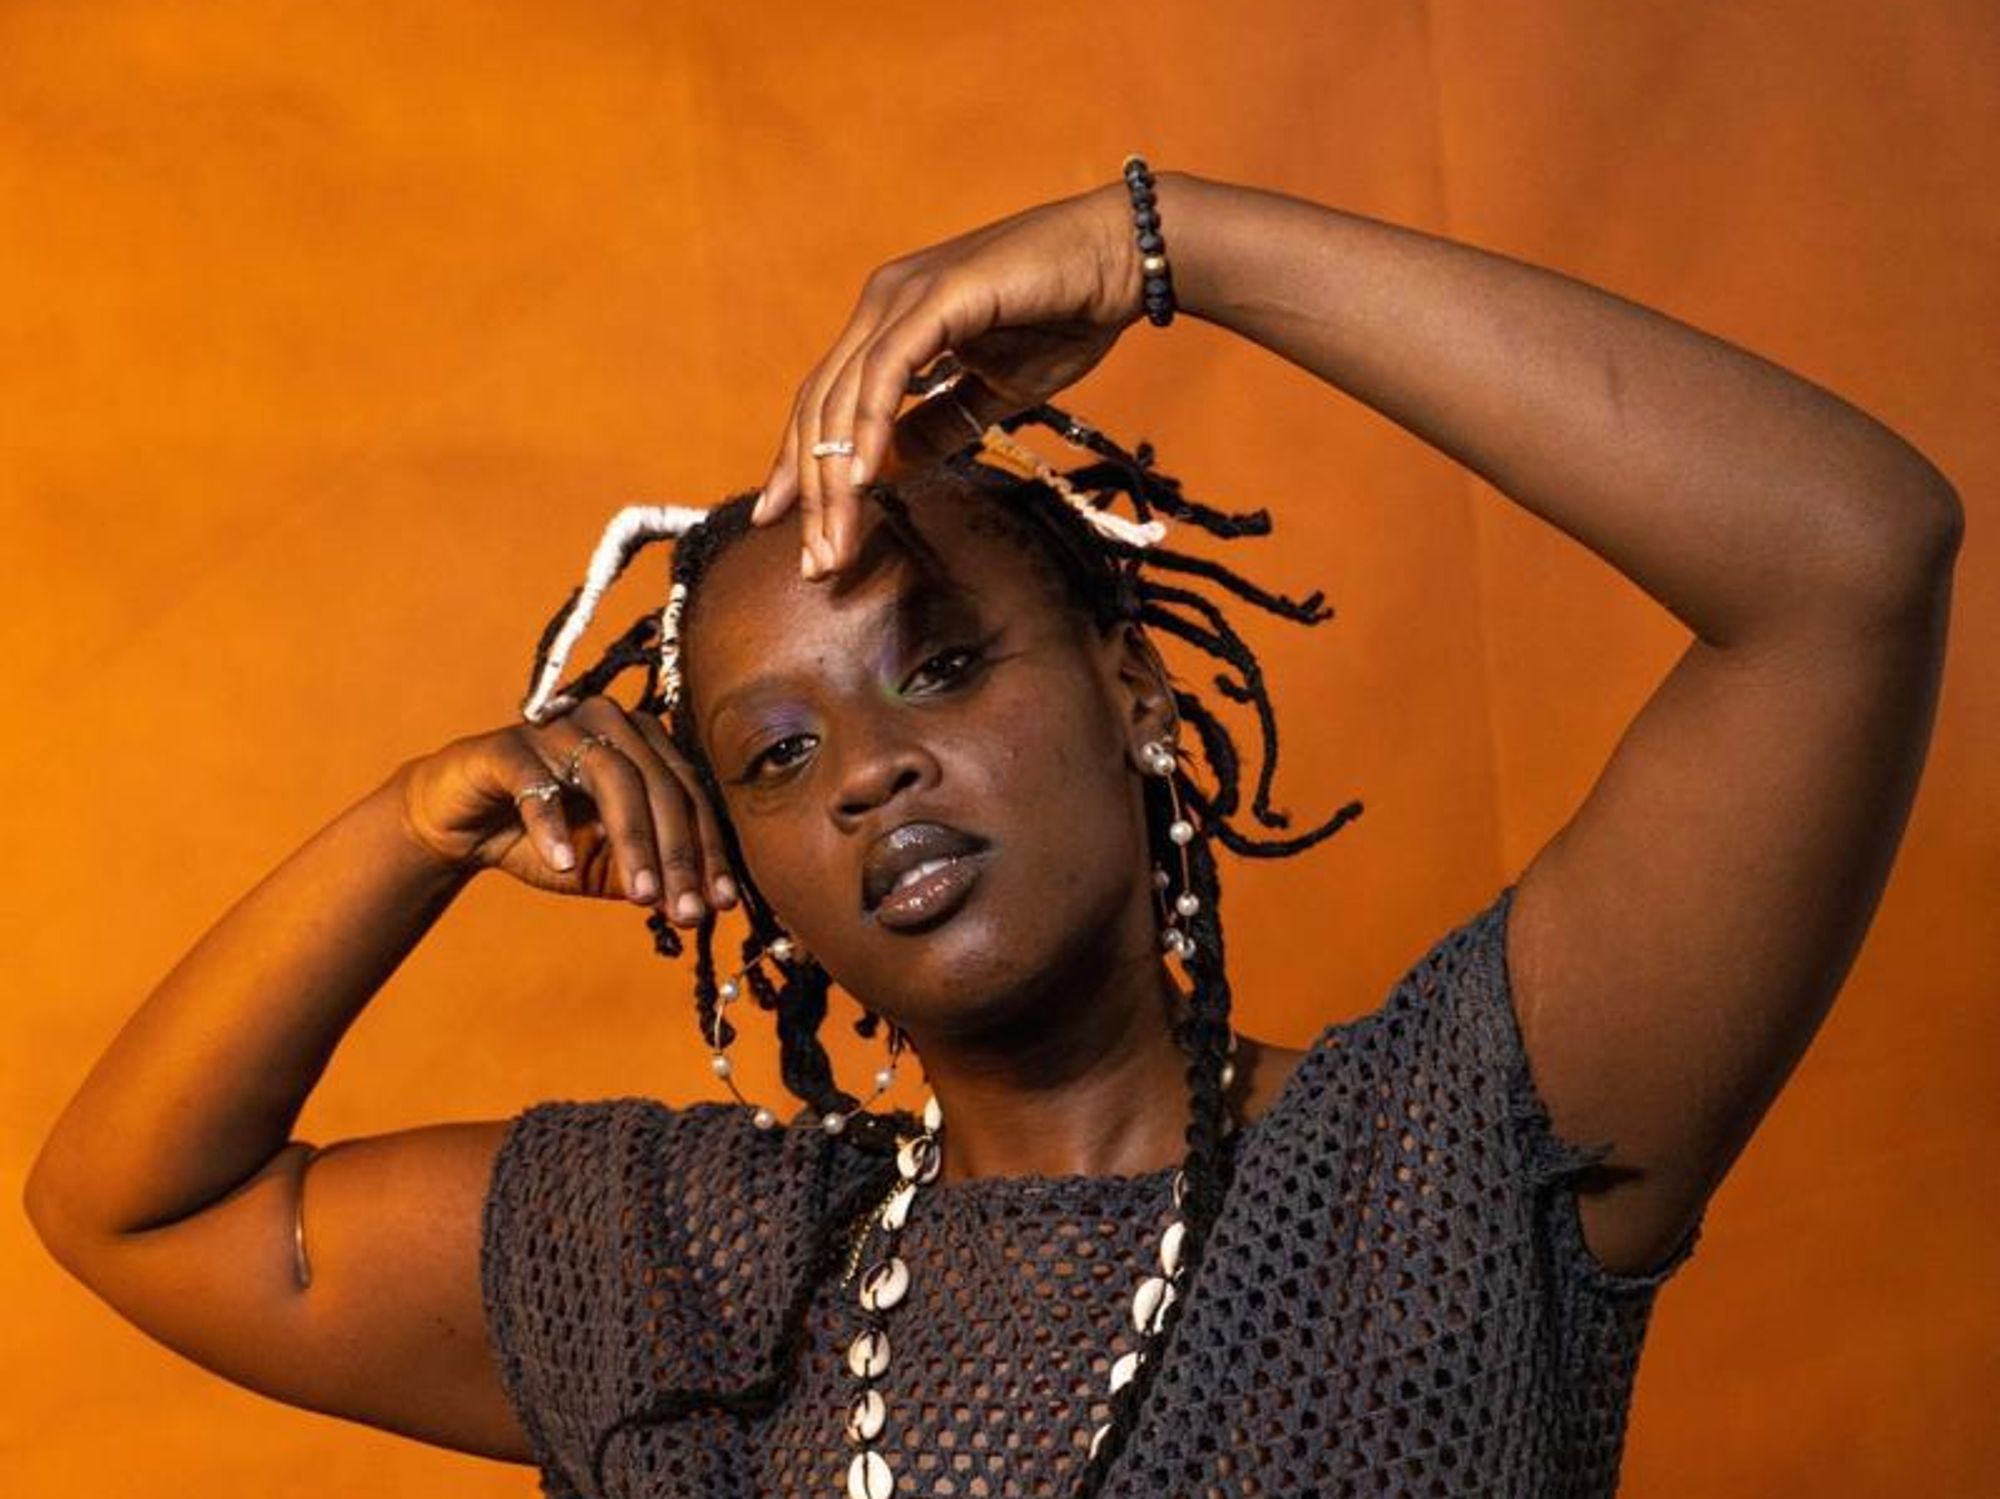 How a Kampala-Based Studio is Bringing More Women into the Mix